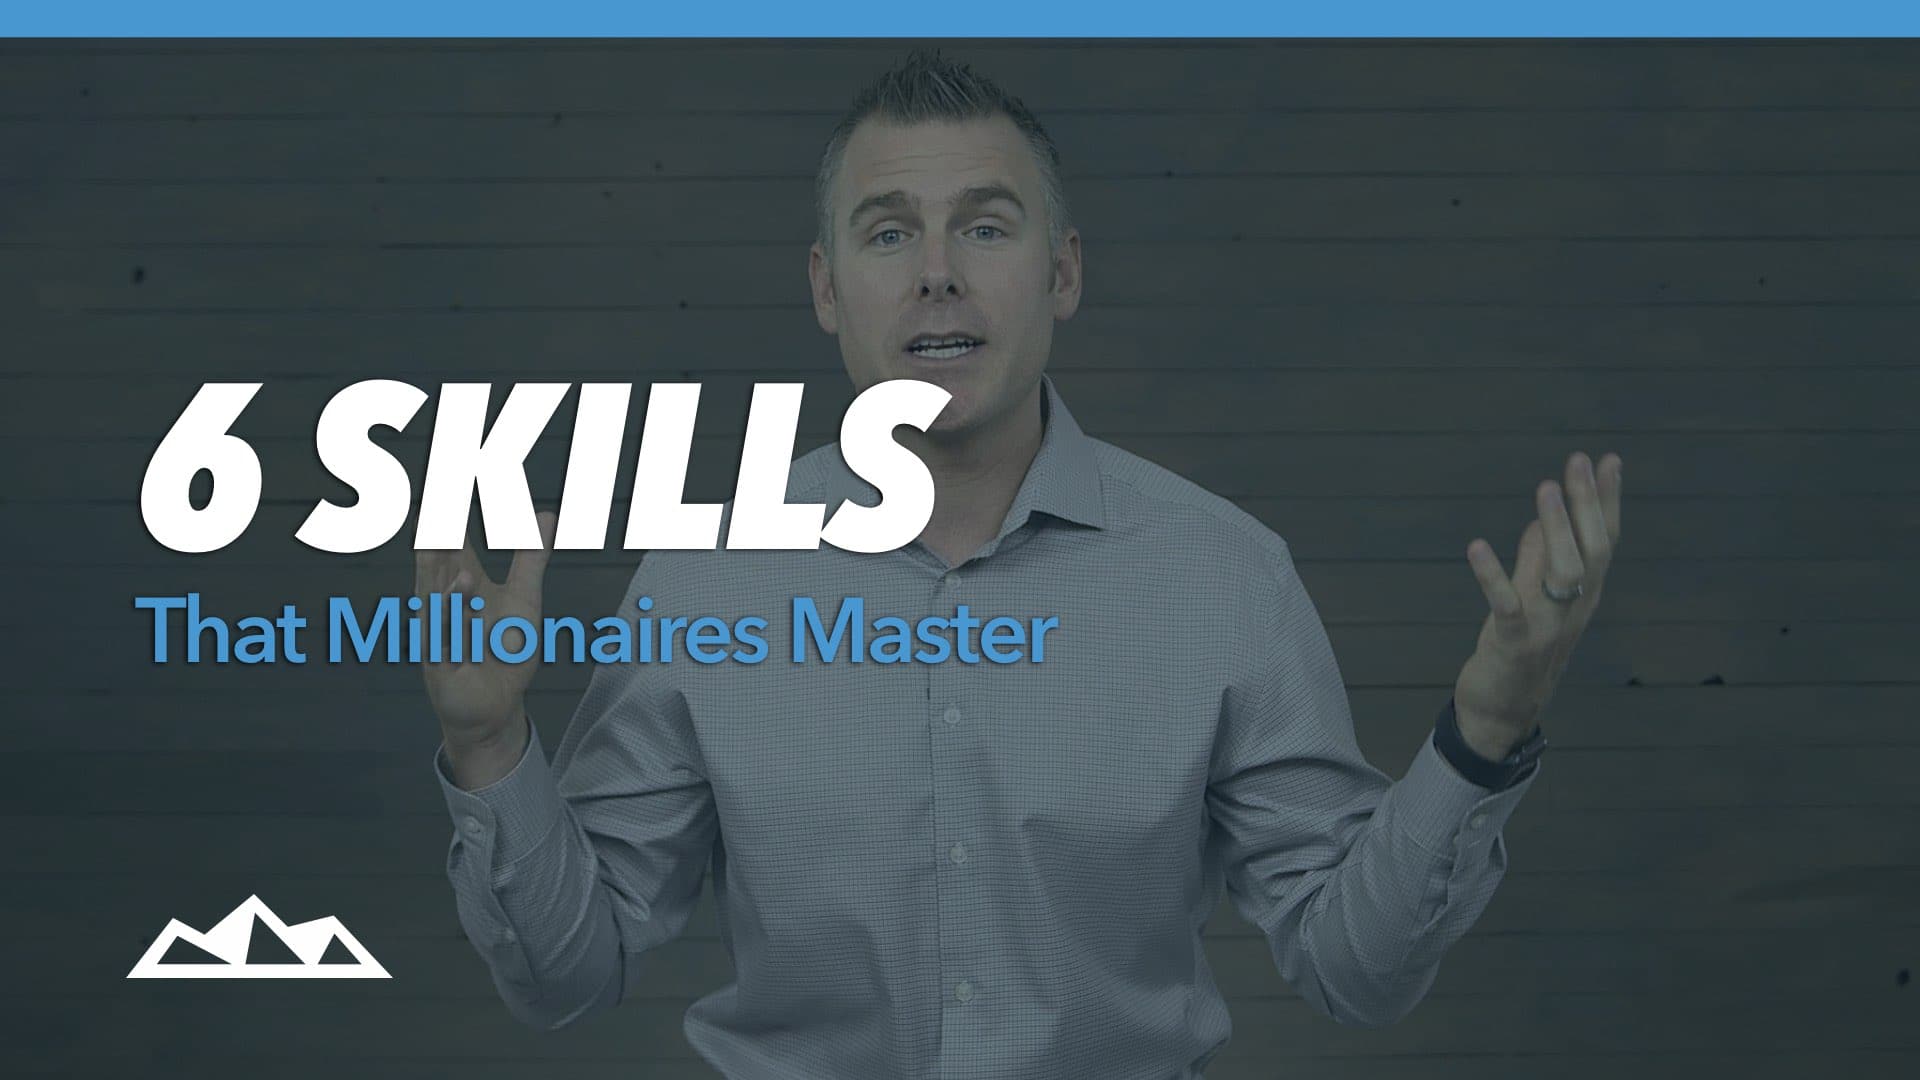 6 Skills Every Entrepreneur Needs to Learn To Build a Million Dollar Company